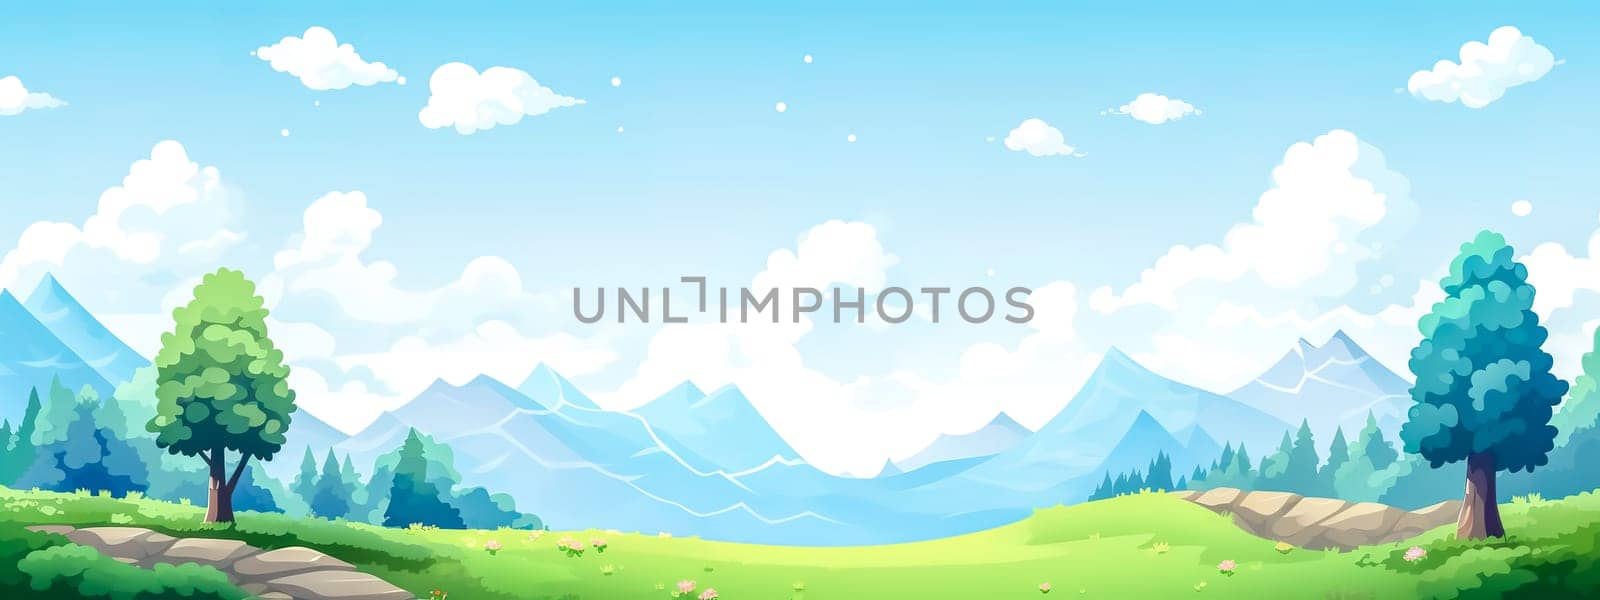 landscape, featuring a lush green meadow with colorful flowers, rounded trees with thick foliage, and a backdrop of layered blue mountains under a bright sky dotted with fluffy white clouds, banner